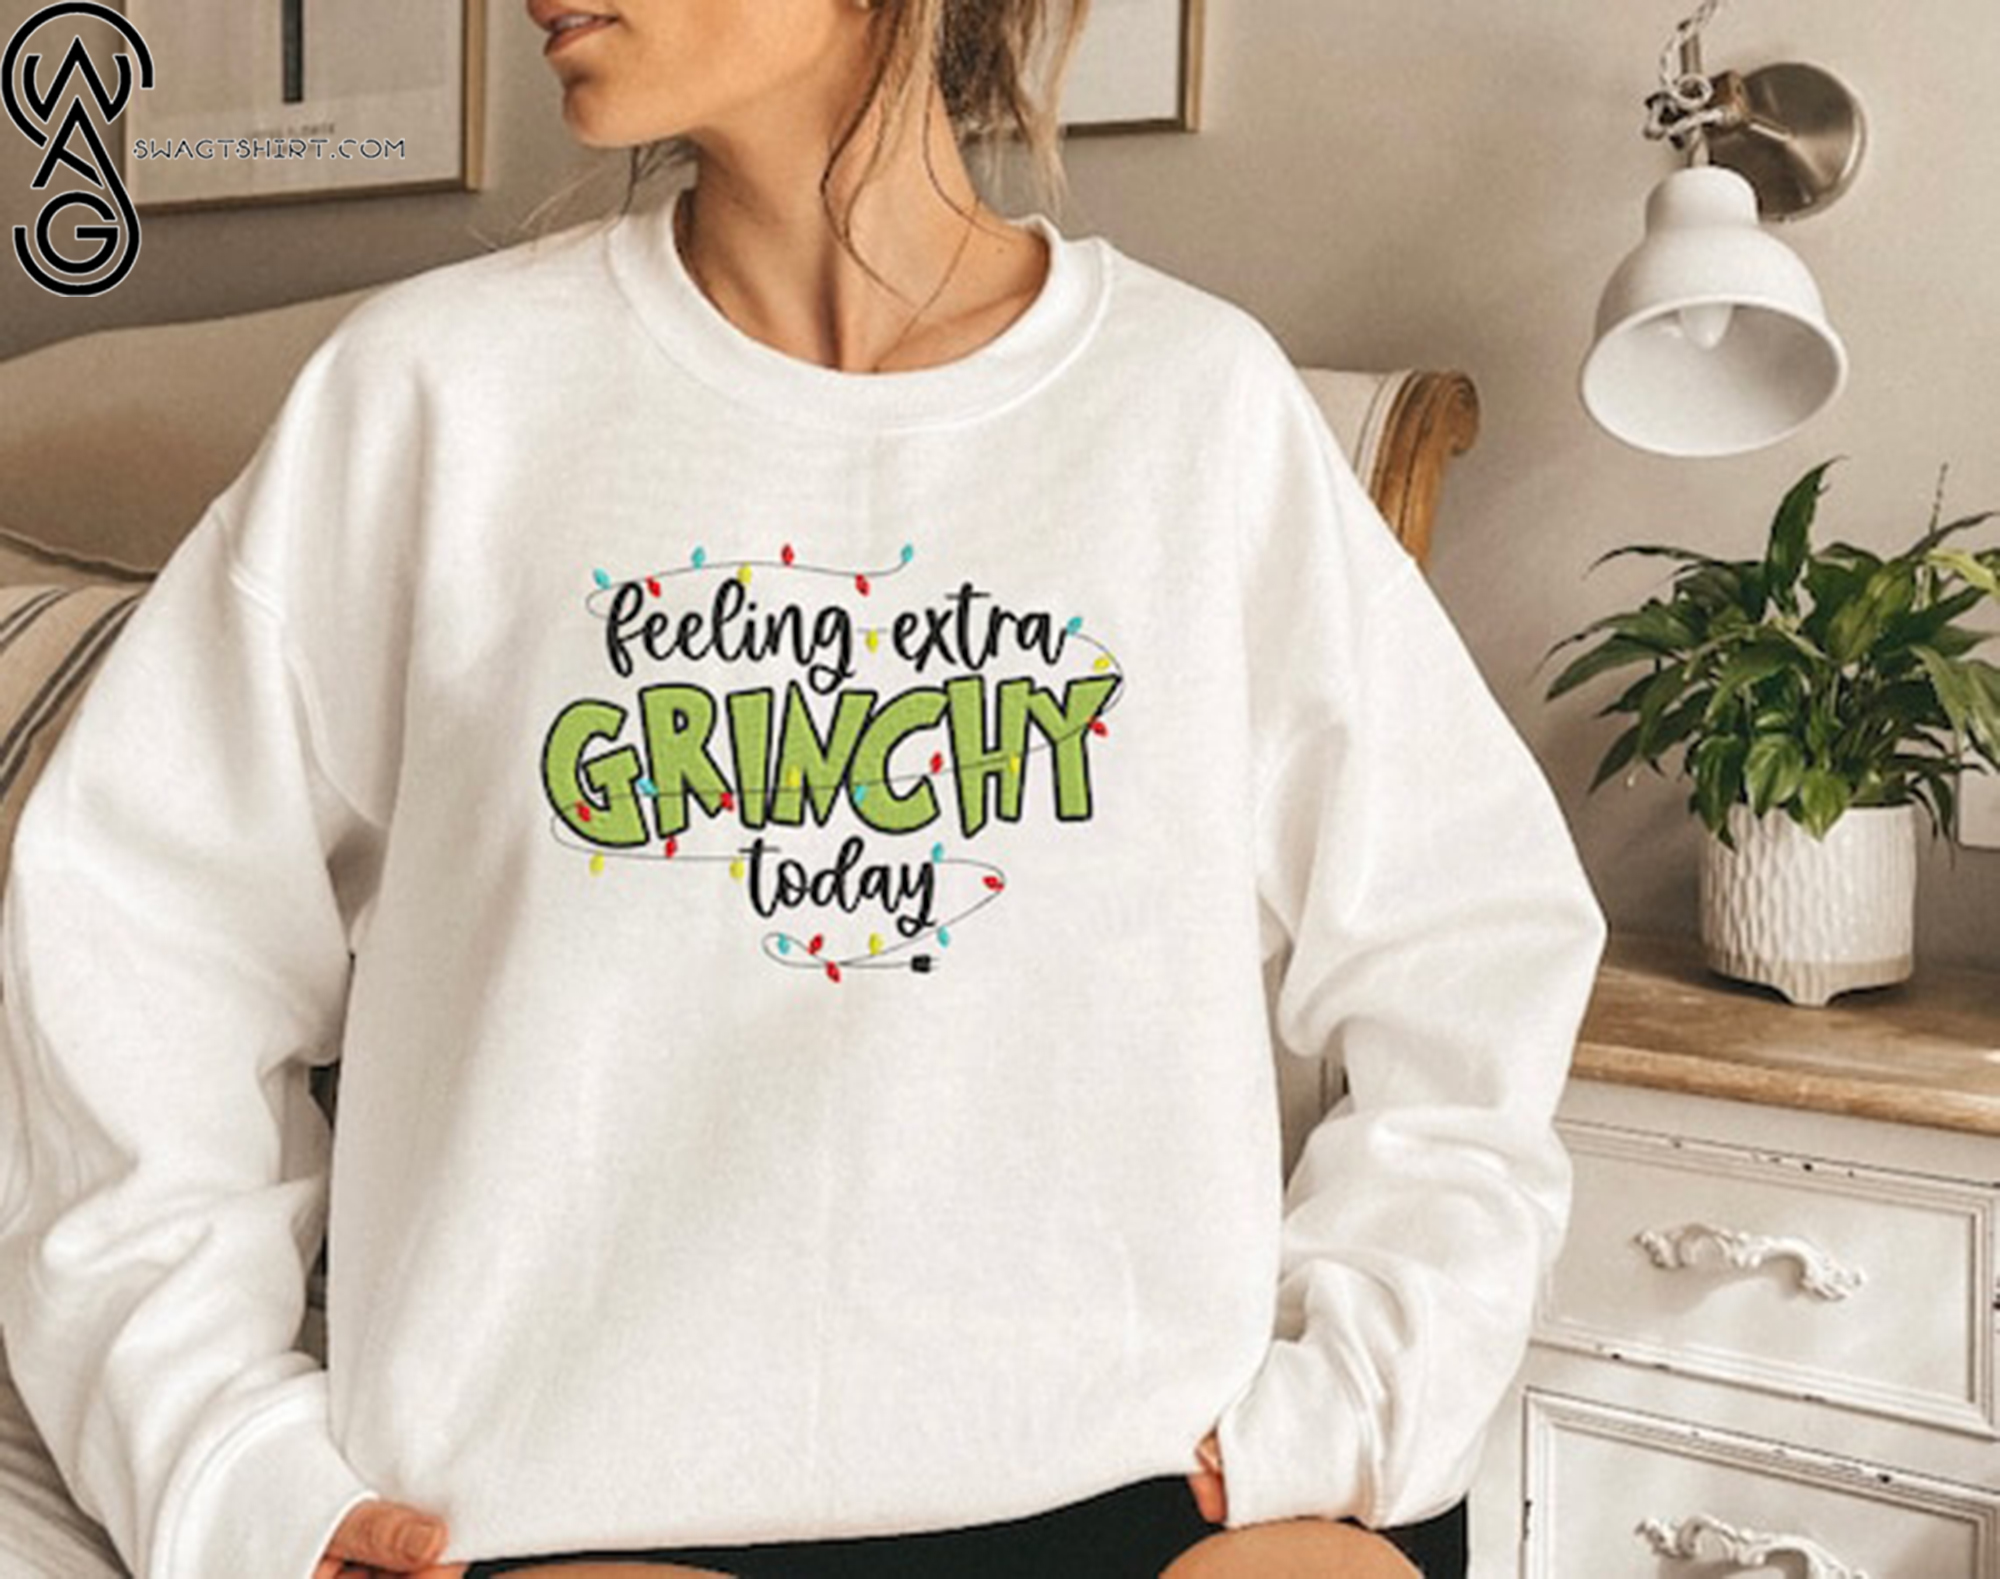 Get into the Holiday Spirit with Grinchy Sweatshirts and Sweaters The Ultimate Christmas Gift Ideas